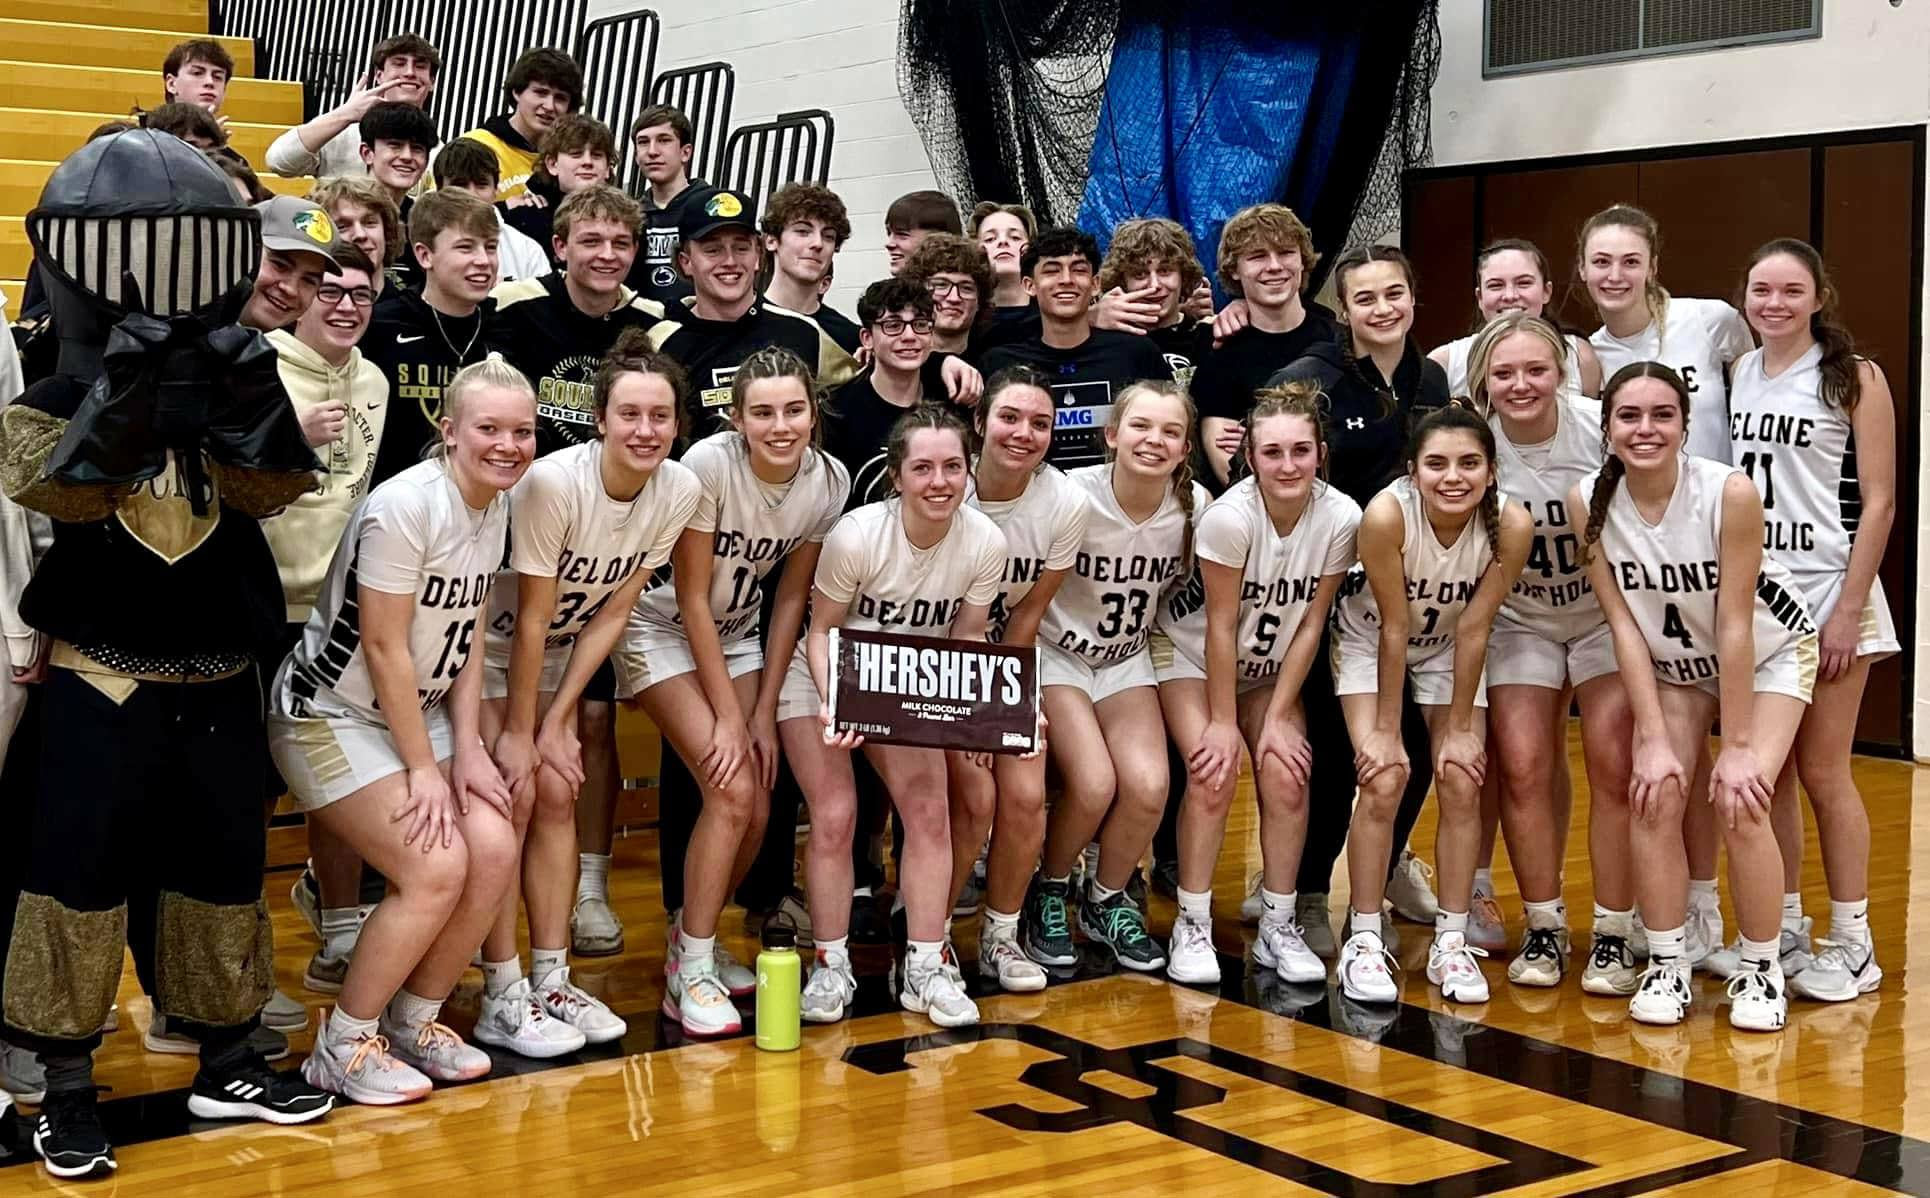 Girls' basketball team poses with fans after earning spot in district championship game